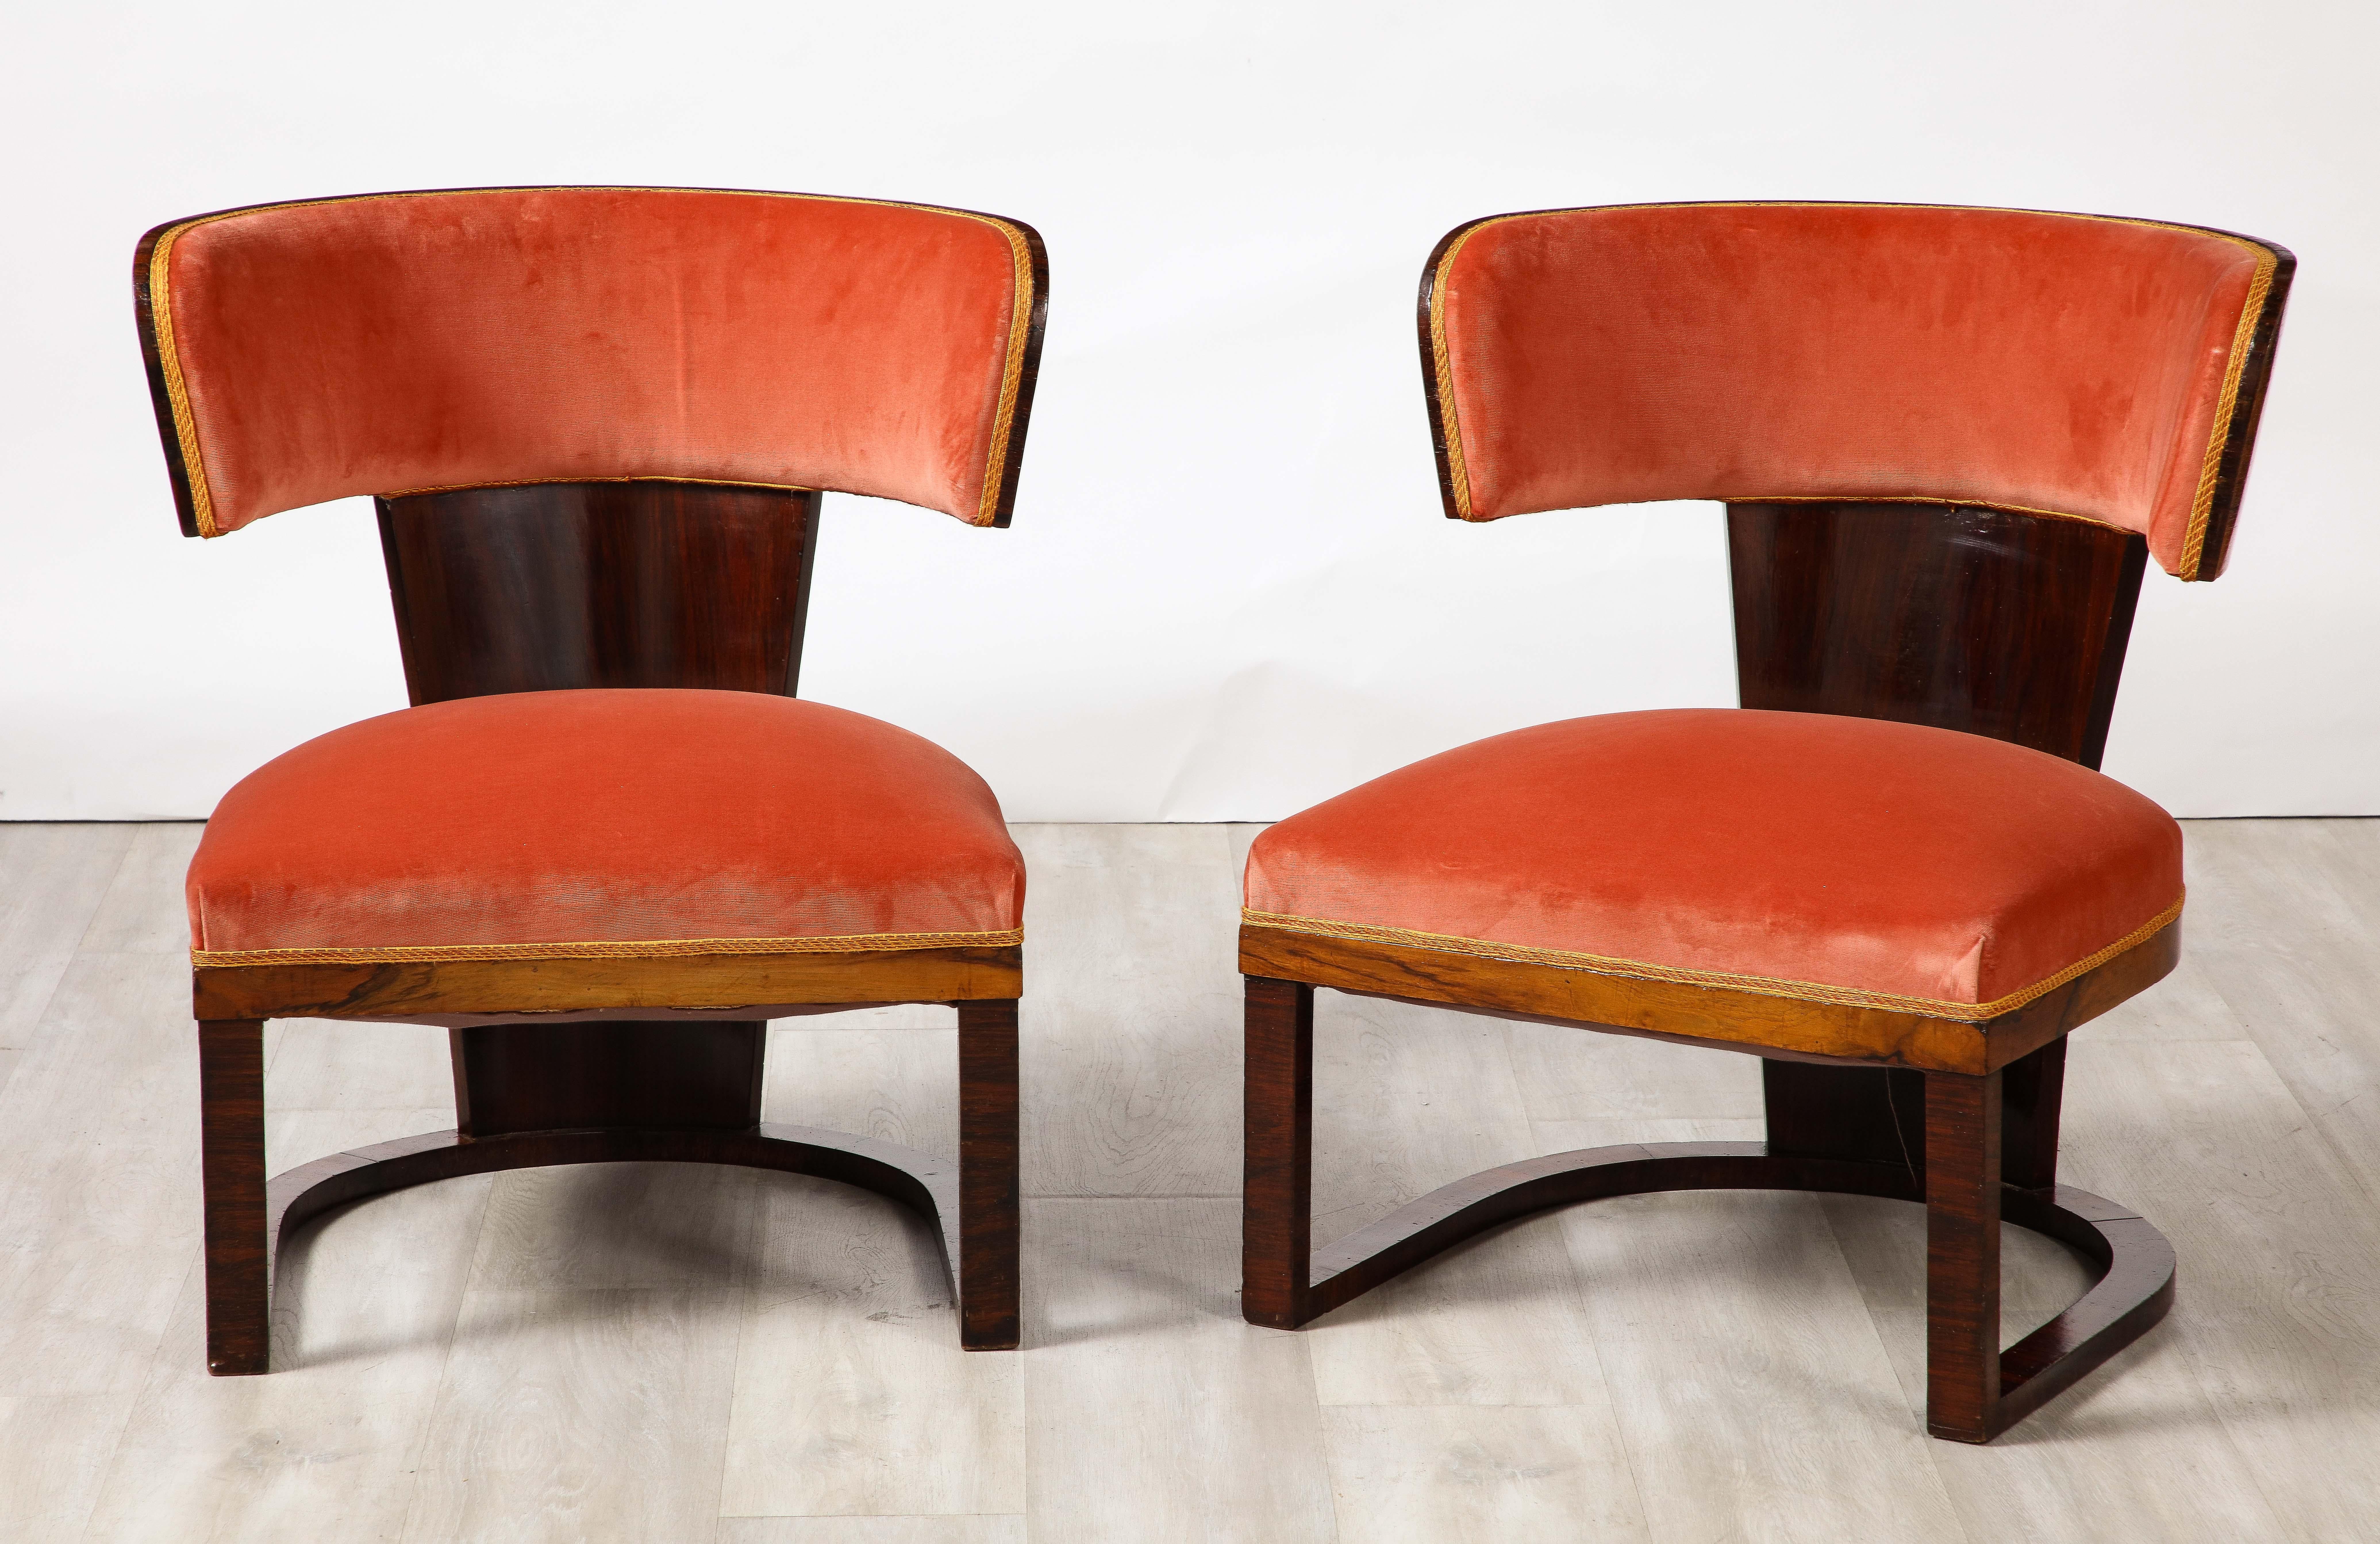 Ernesto La Padula Pair of Italian Art Deco Side Chairs, Italy, circa 1930 In Good Condition For Sale In New York, NY